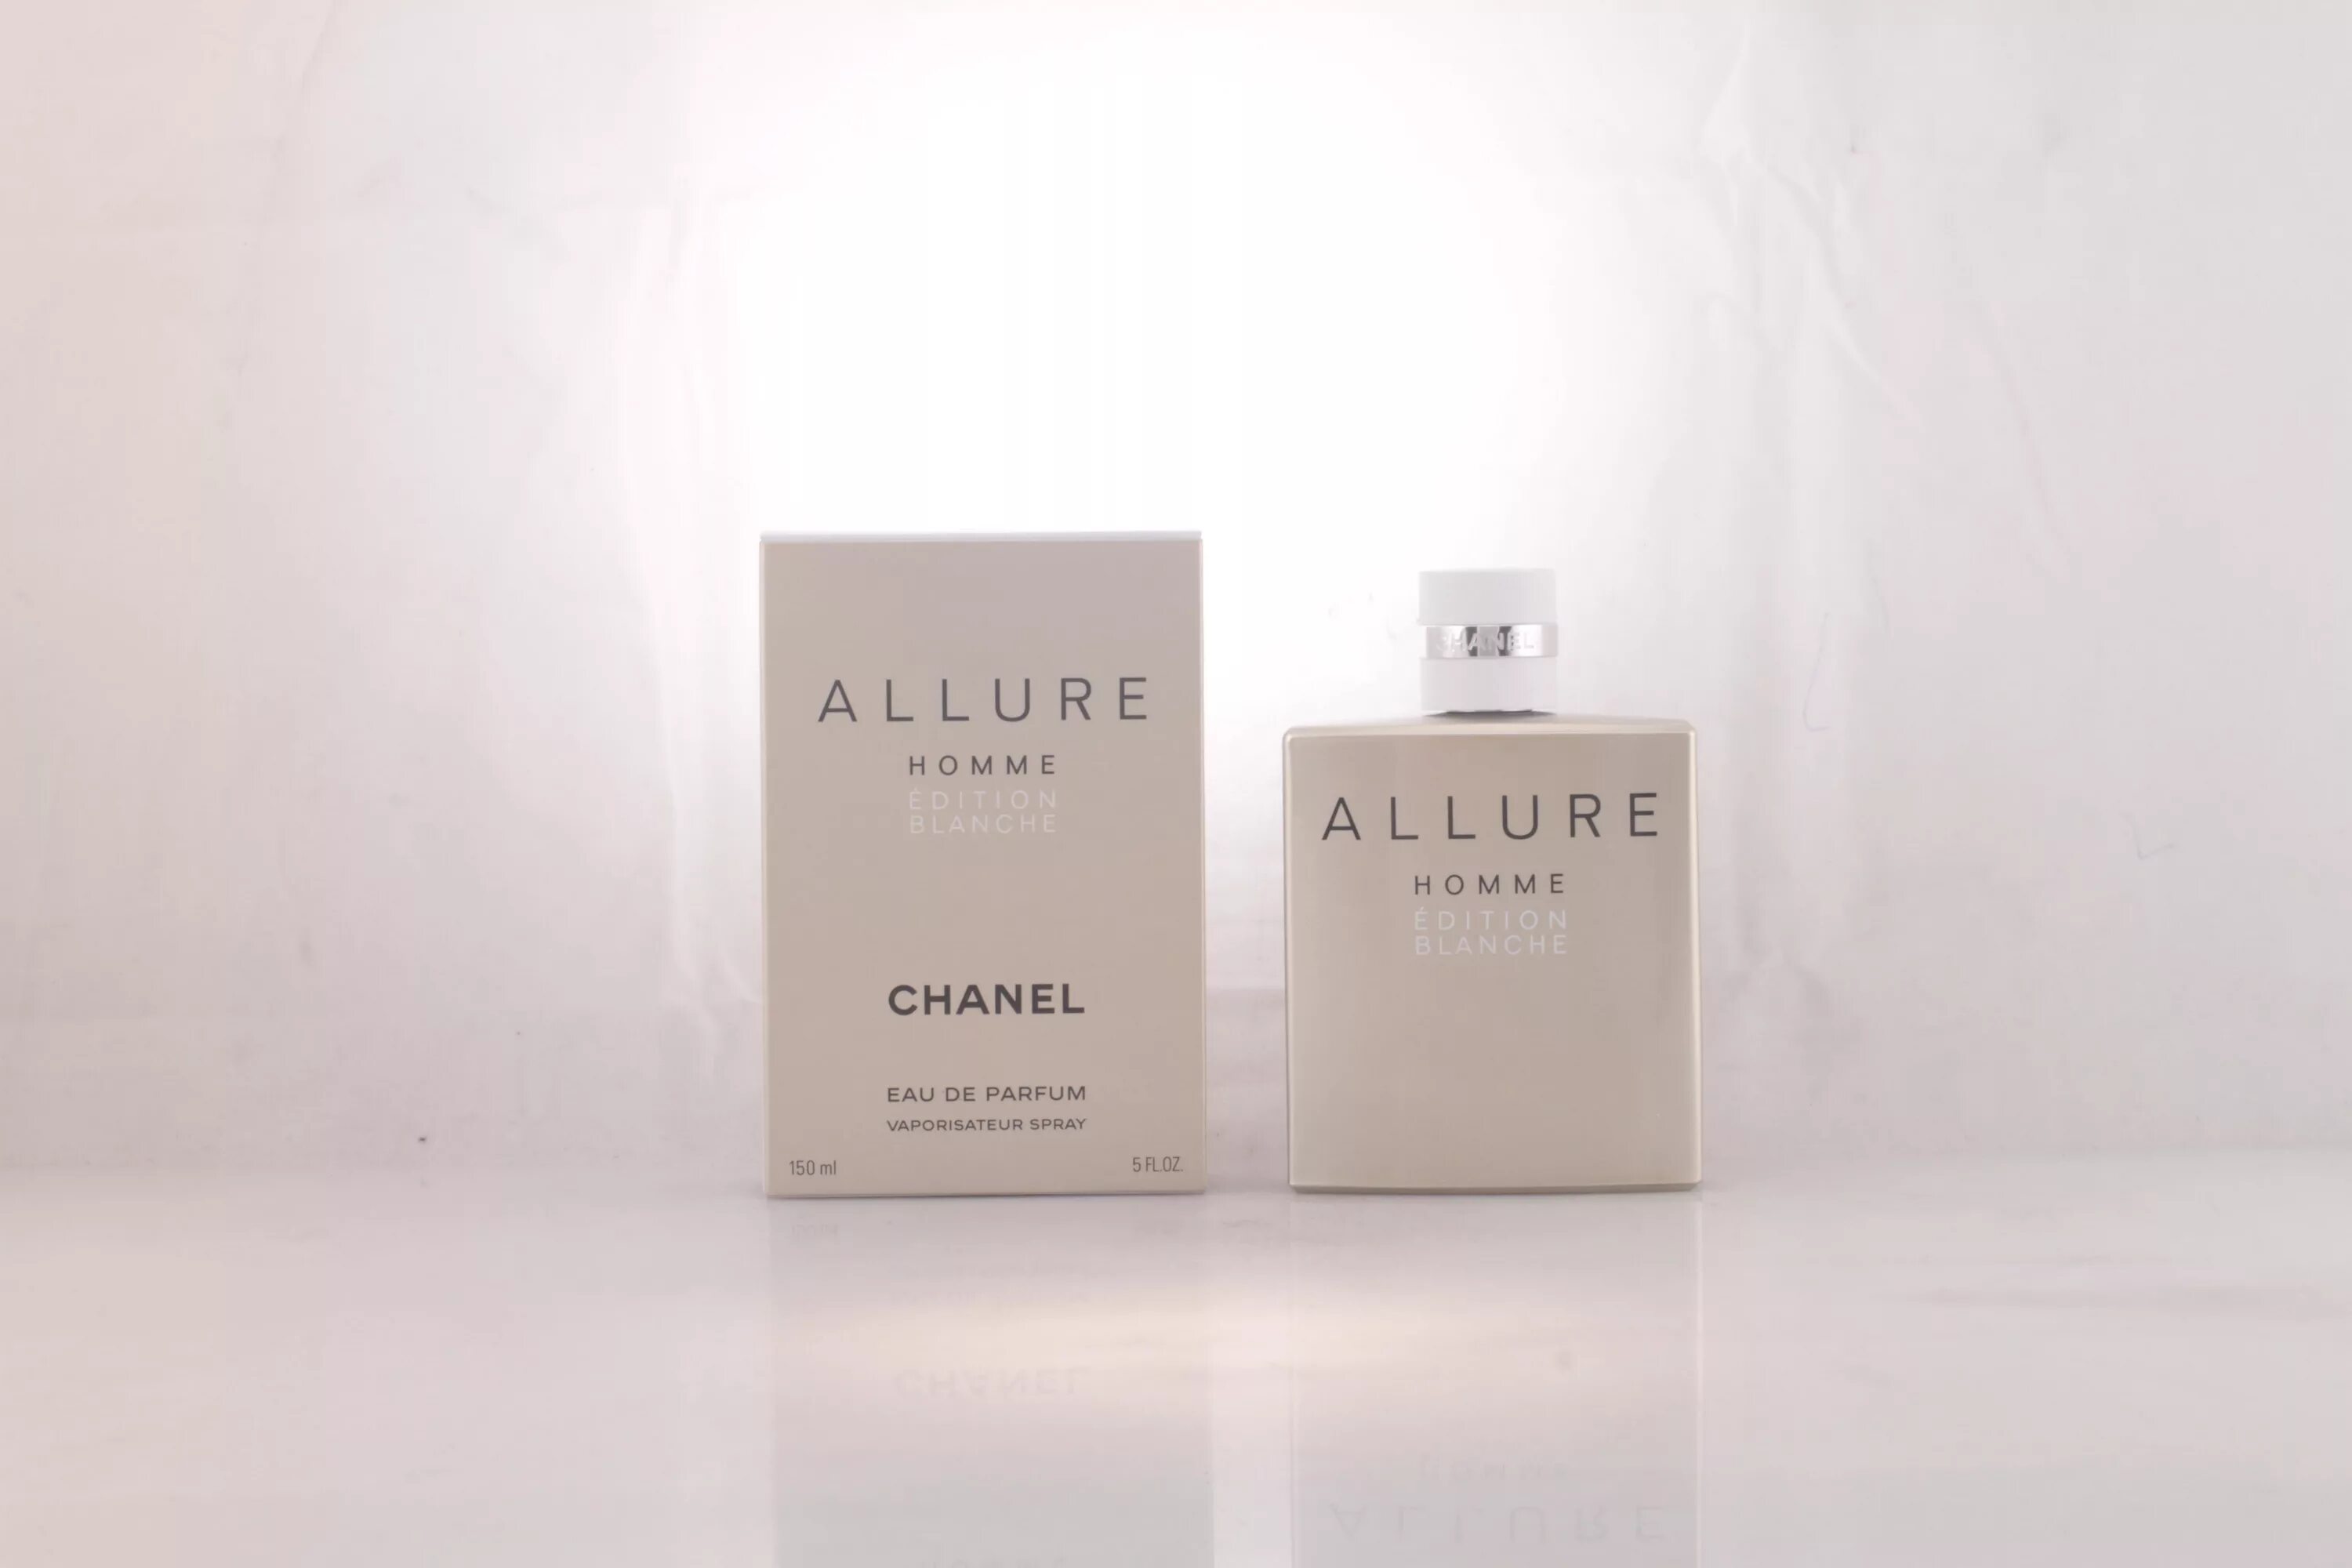 Chanel homme edition. Chanel Allure homme Edition Blanche. Chanel Allure homme Edition Blanche Eau de Parfum. Allure homme Blanche Edition 150 мл. Парфюм Allure homme Edition Blanche Chanel.